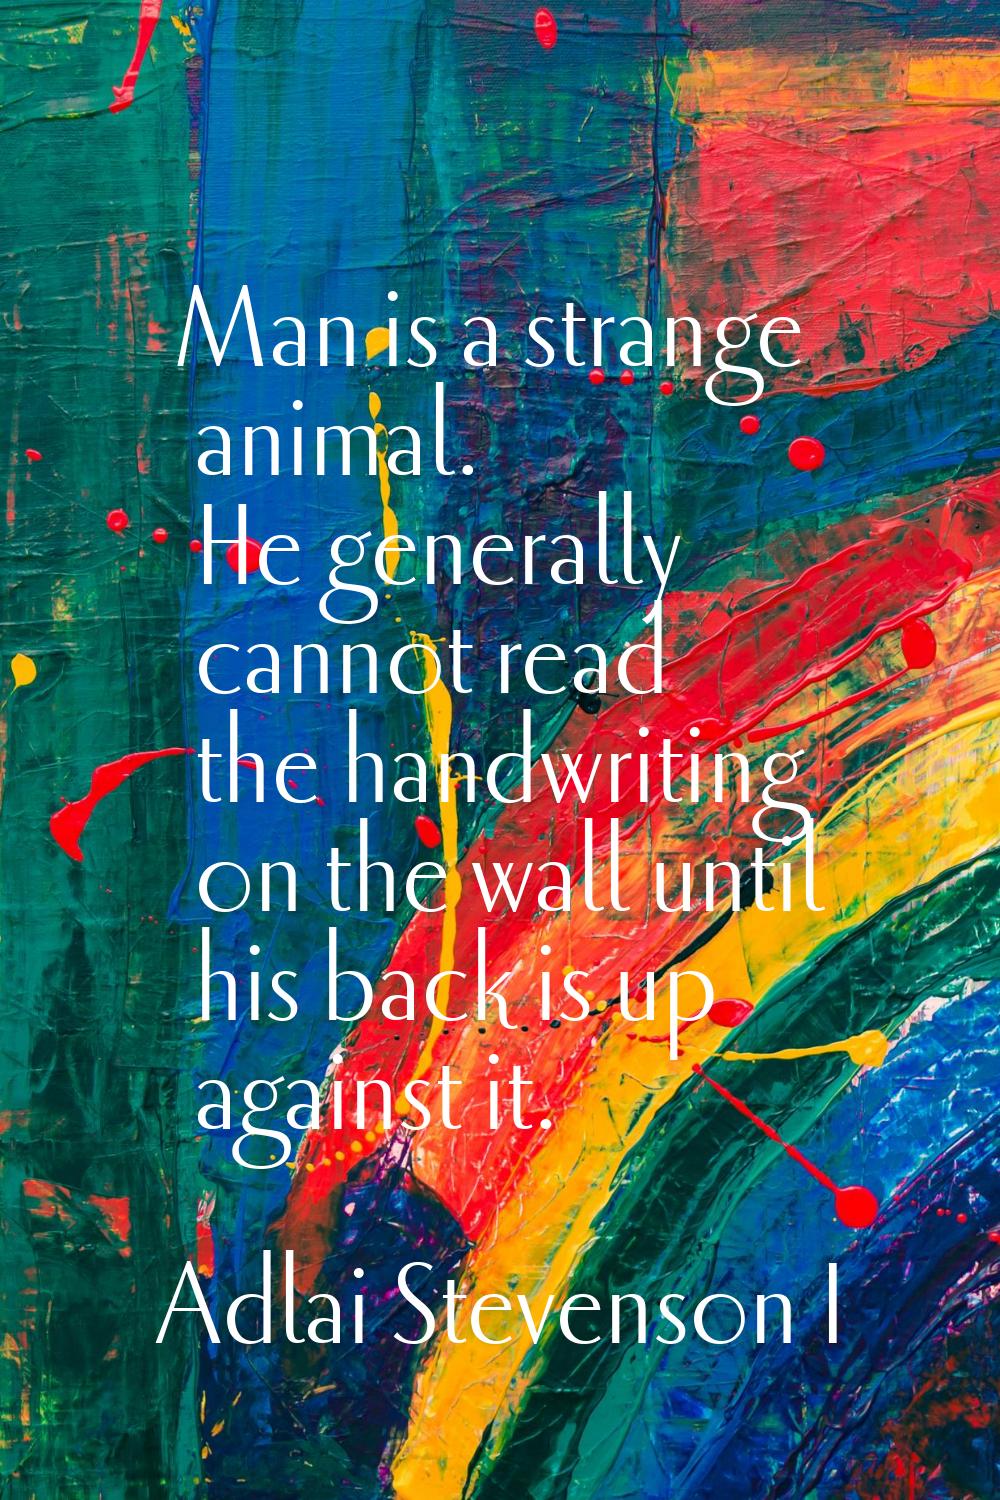 Man is a strange animal. He generally cannot read the handwriting on the wall until his back is up 